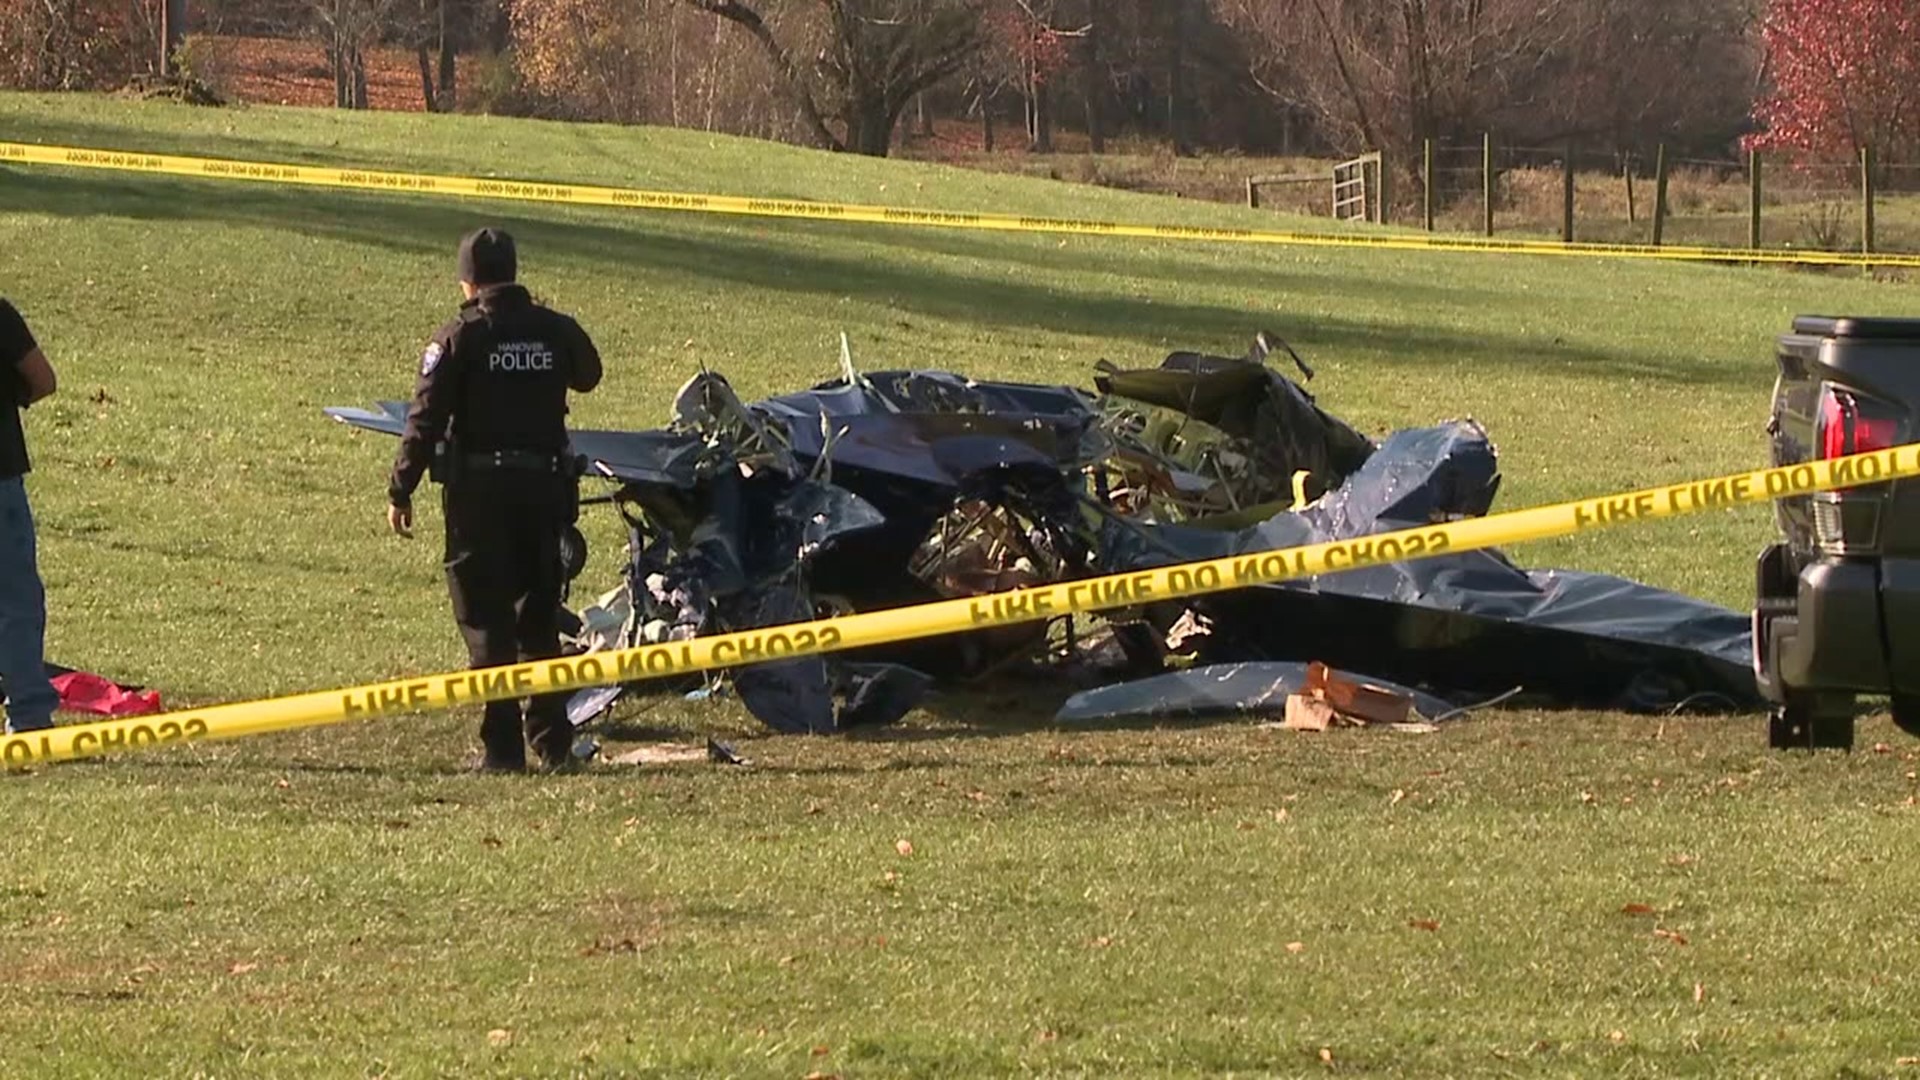 The crash happened early Saturday afternoon on Doran's Farm in Hanover Township.